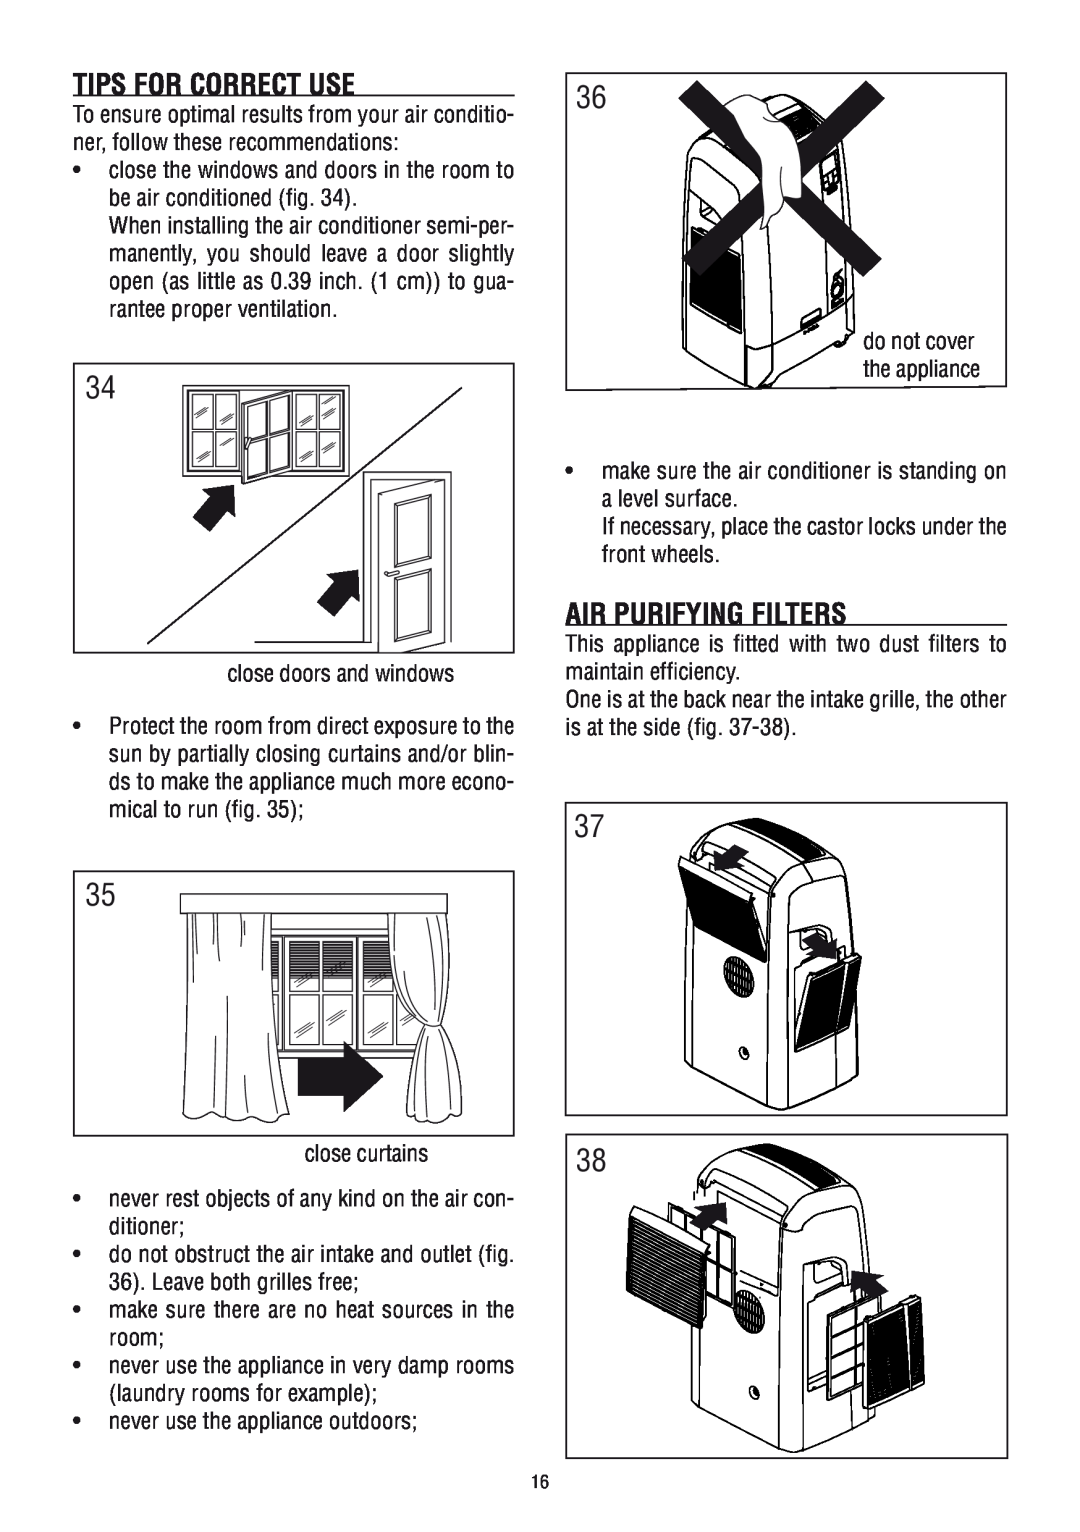 DeLonghi PAC WE 110 manual Tips For Correct Use, Air Purifying Filters 